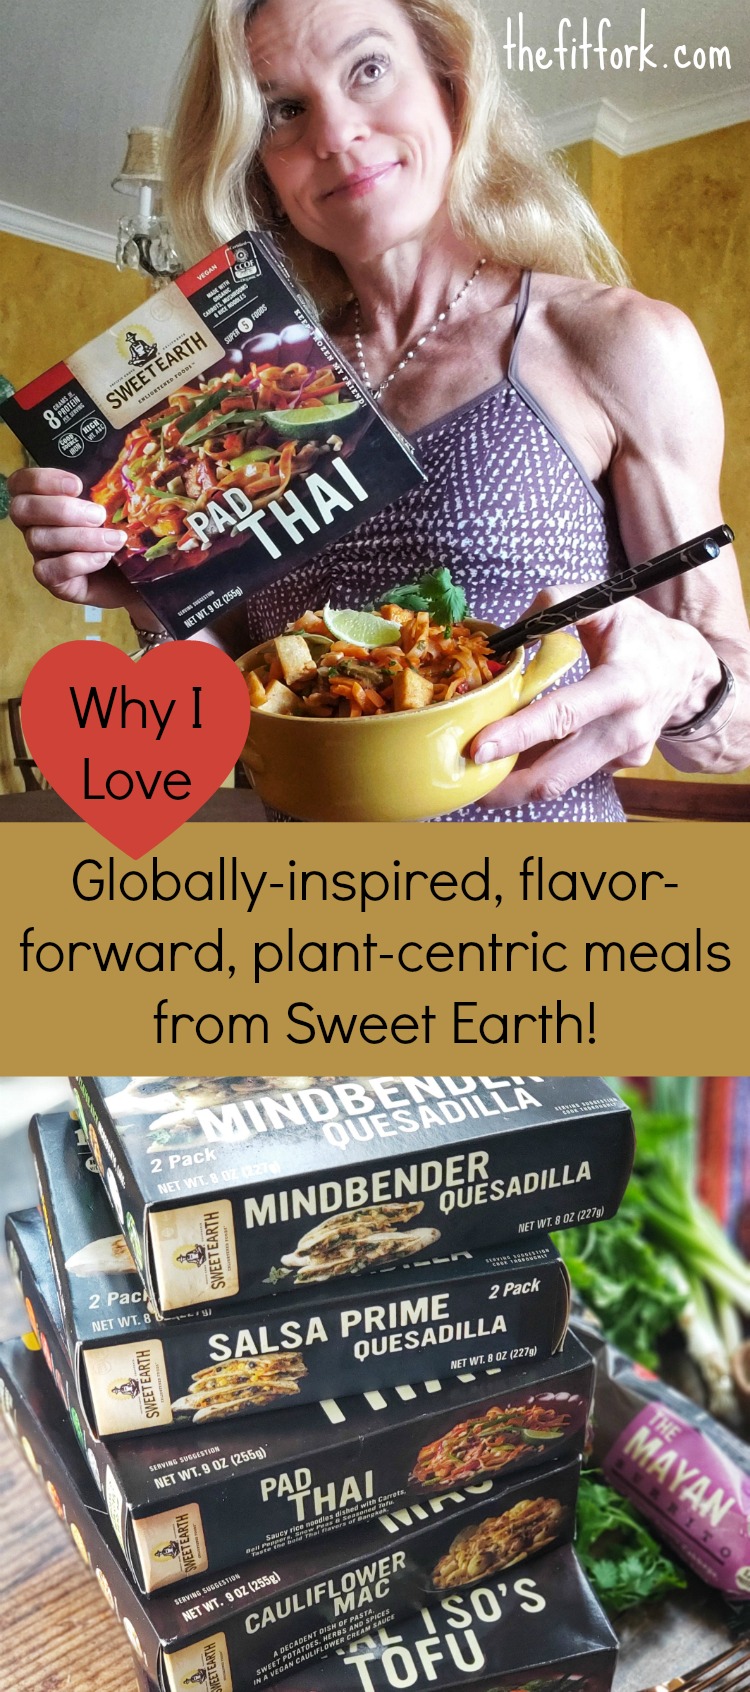 Sweet Earth Foods - globally-inspired, flavor-forward, plant-centric frozen meals for healthy breakfast, lunch and dinner. Find out all the reasons I love this great product that can be found at Target nationwide. #ad